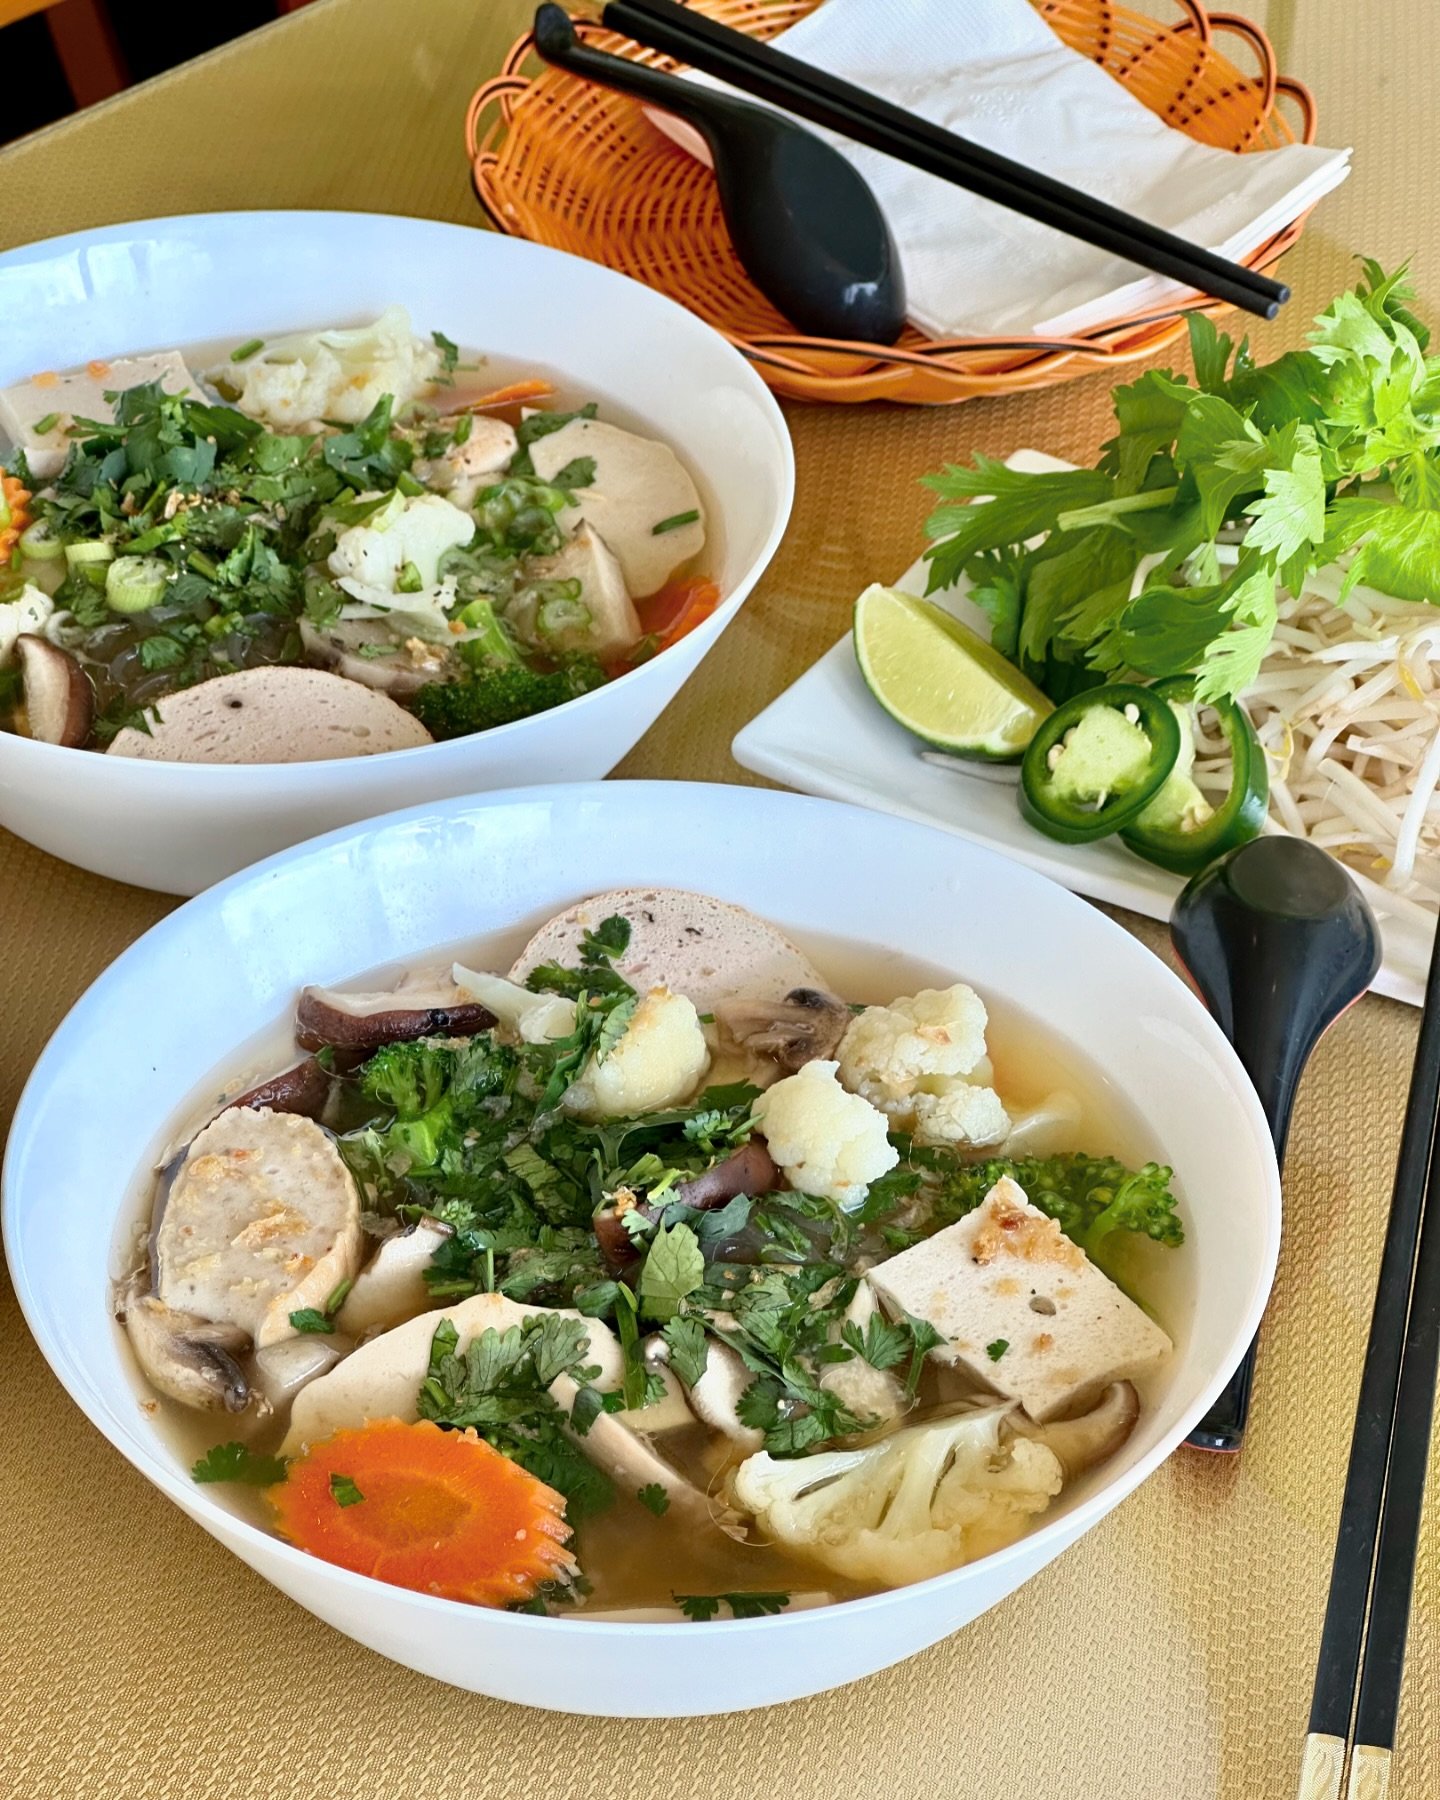 A perfect bowl of a noodle soup when you&rsquo;re craving something light, refreshing and oh so flavorful. Chay&rsquo;s Vegan Hủ Tiếu Noodle Soup features a clear chewy noodle in a delicate and flavorful broth topped with an assortment of vegetables,